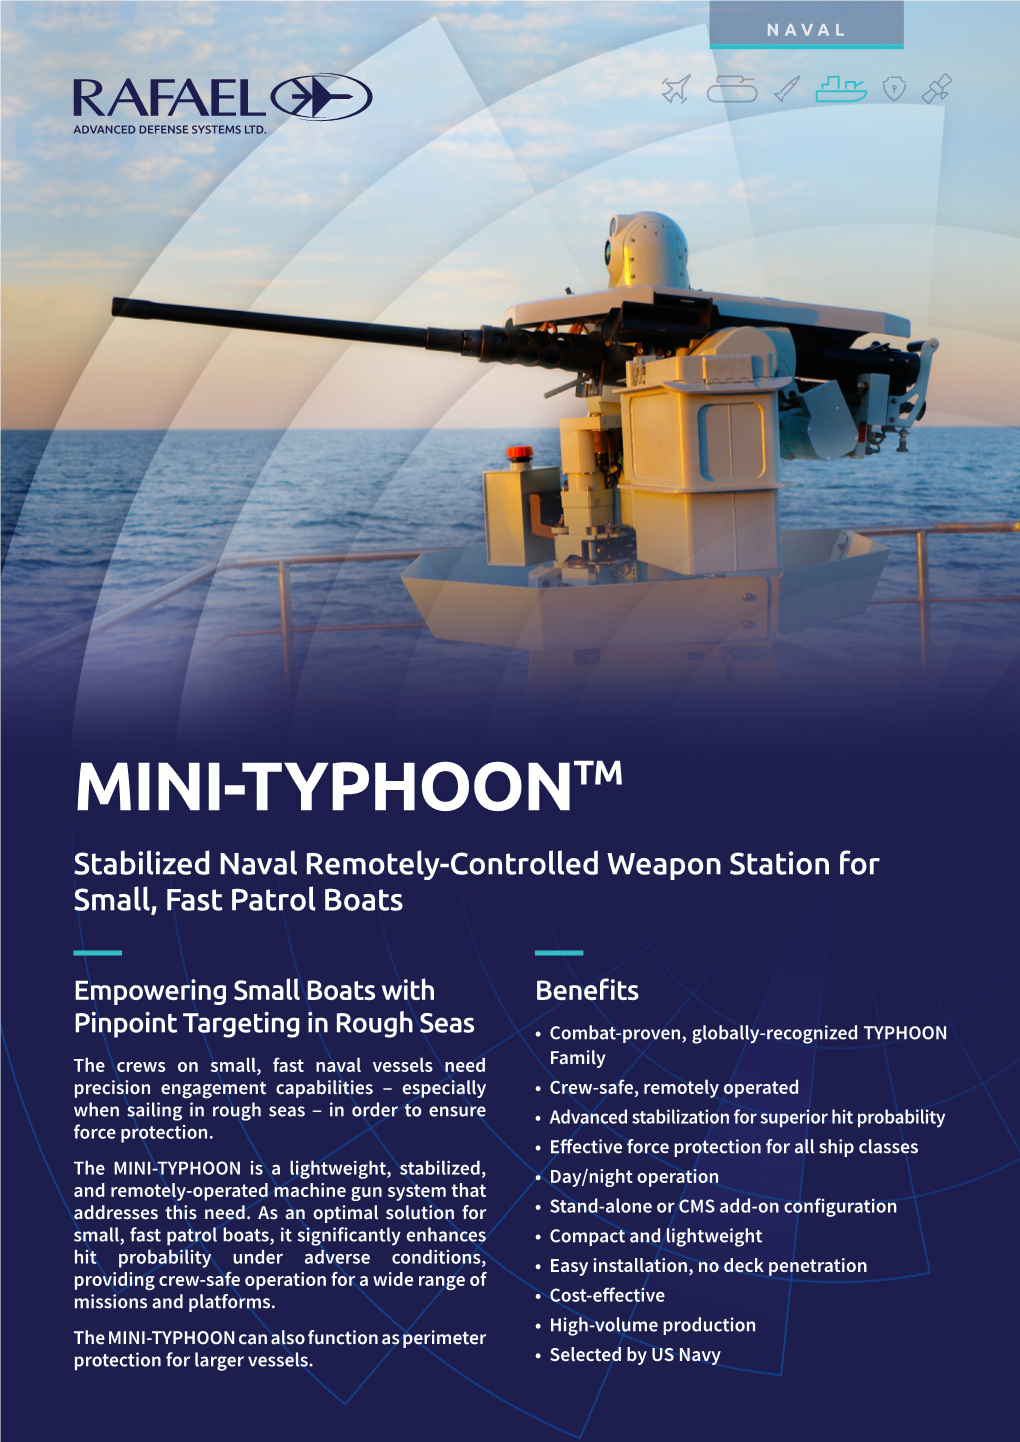 MINI-TYPHOONTM Stabilized Naval Remotely-Controlled Weapon Station for Small, Fast Patrol Boats